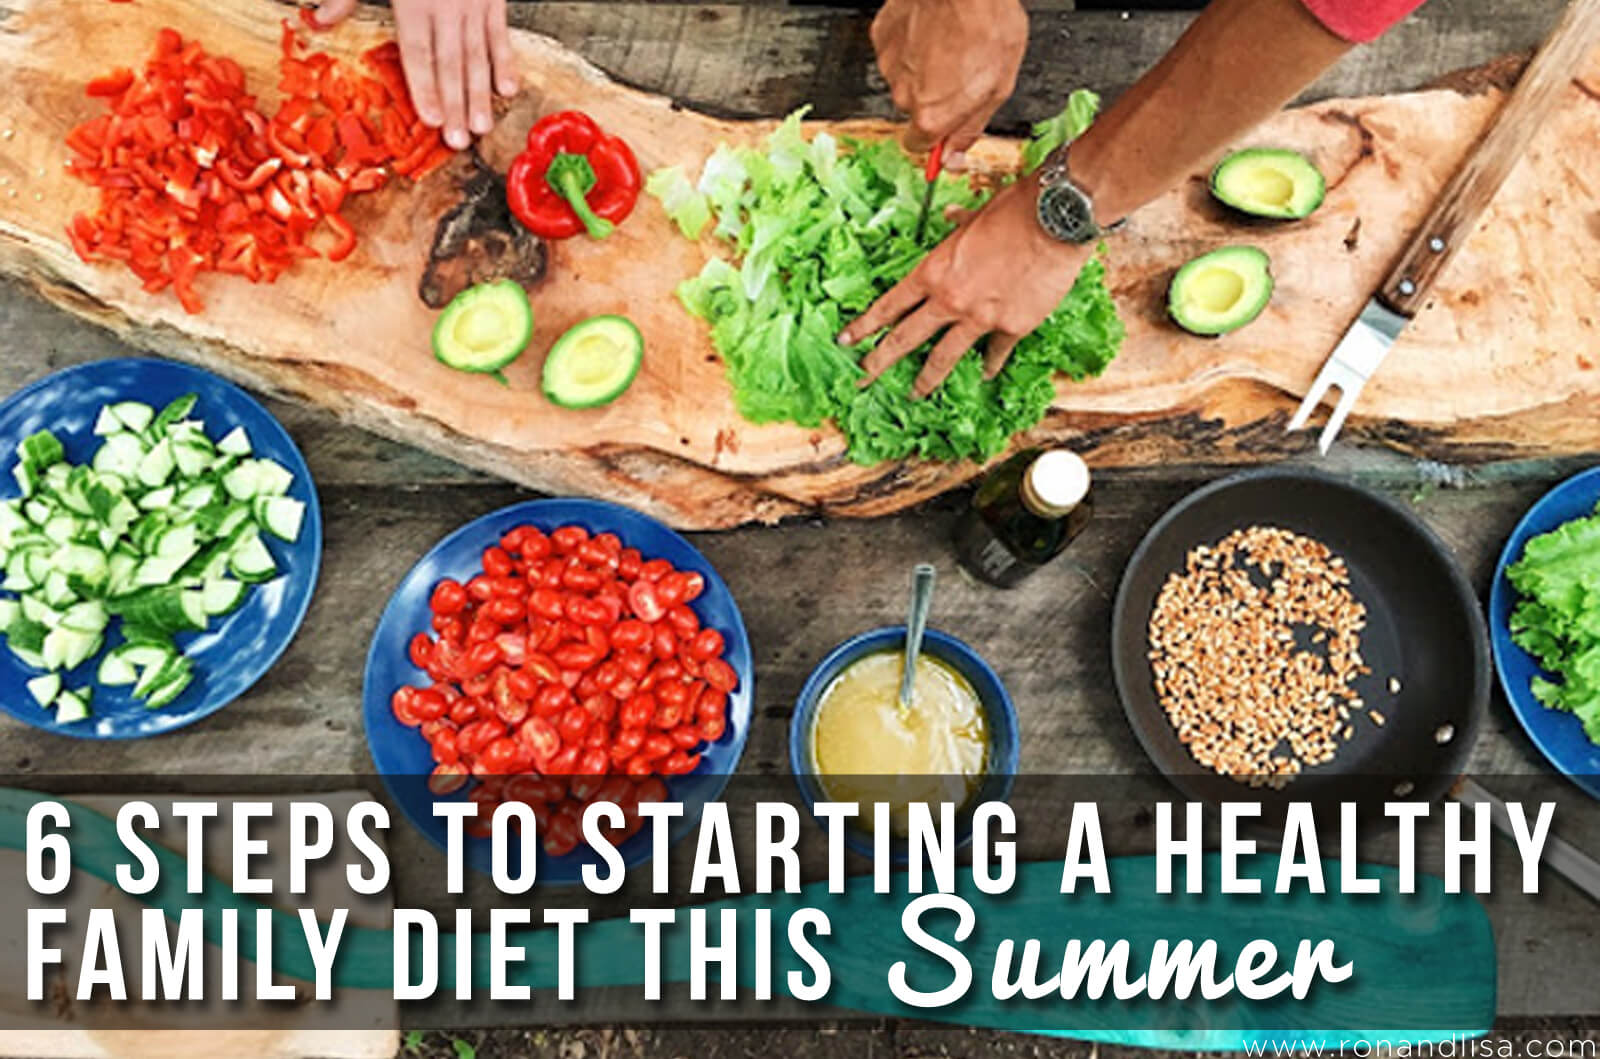 6 Steps To Starting A Healthy Family Diet This Summer